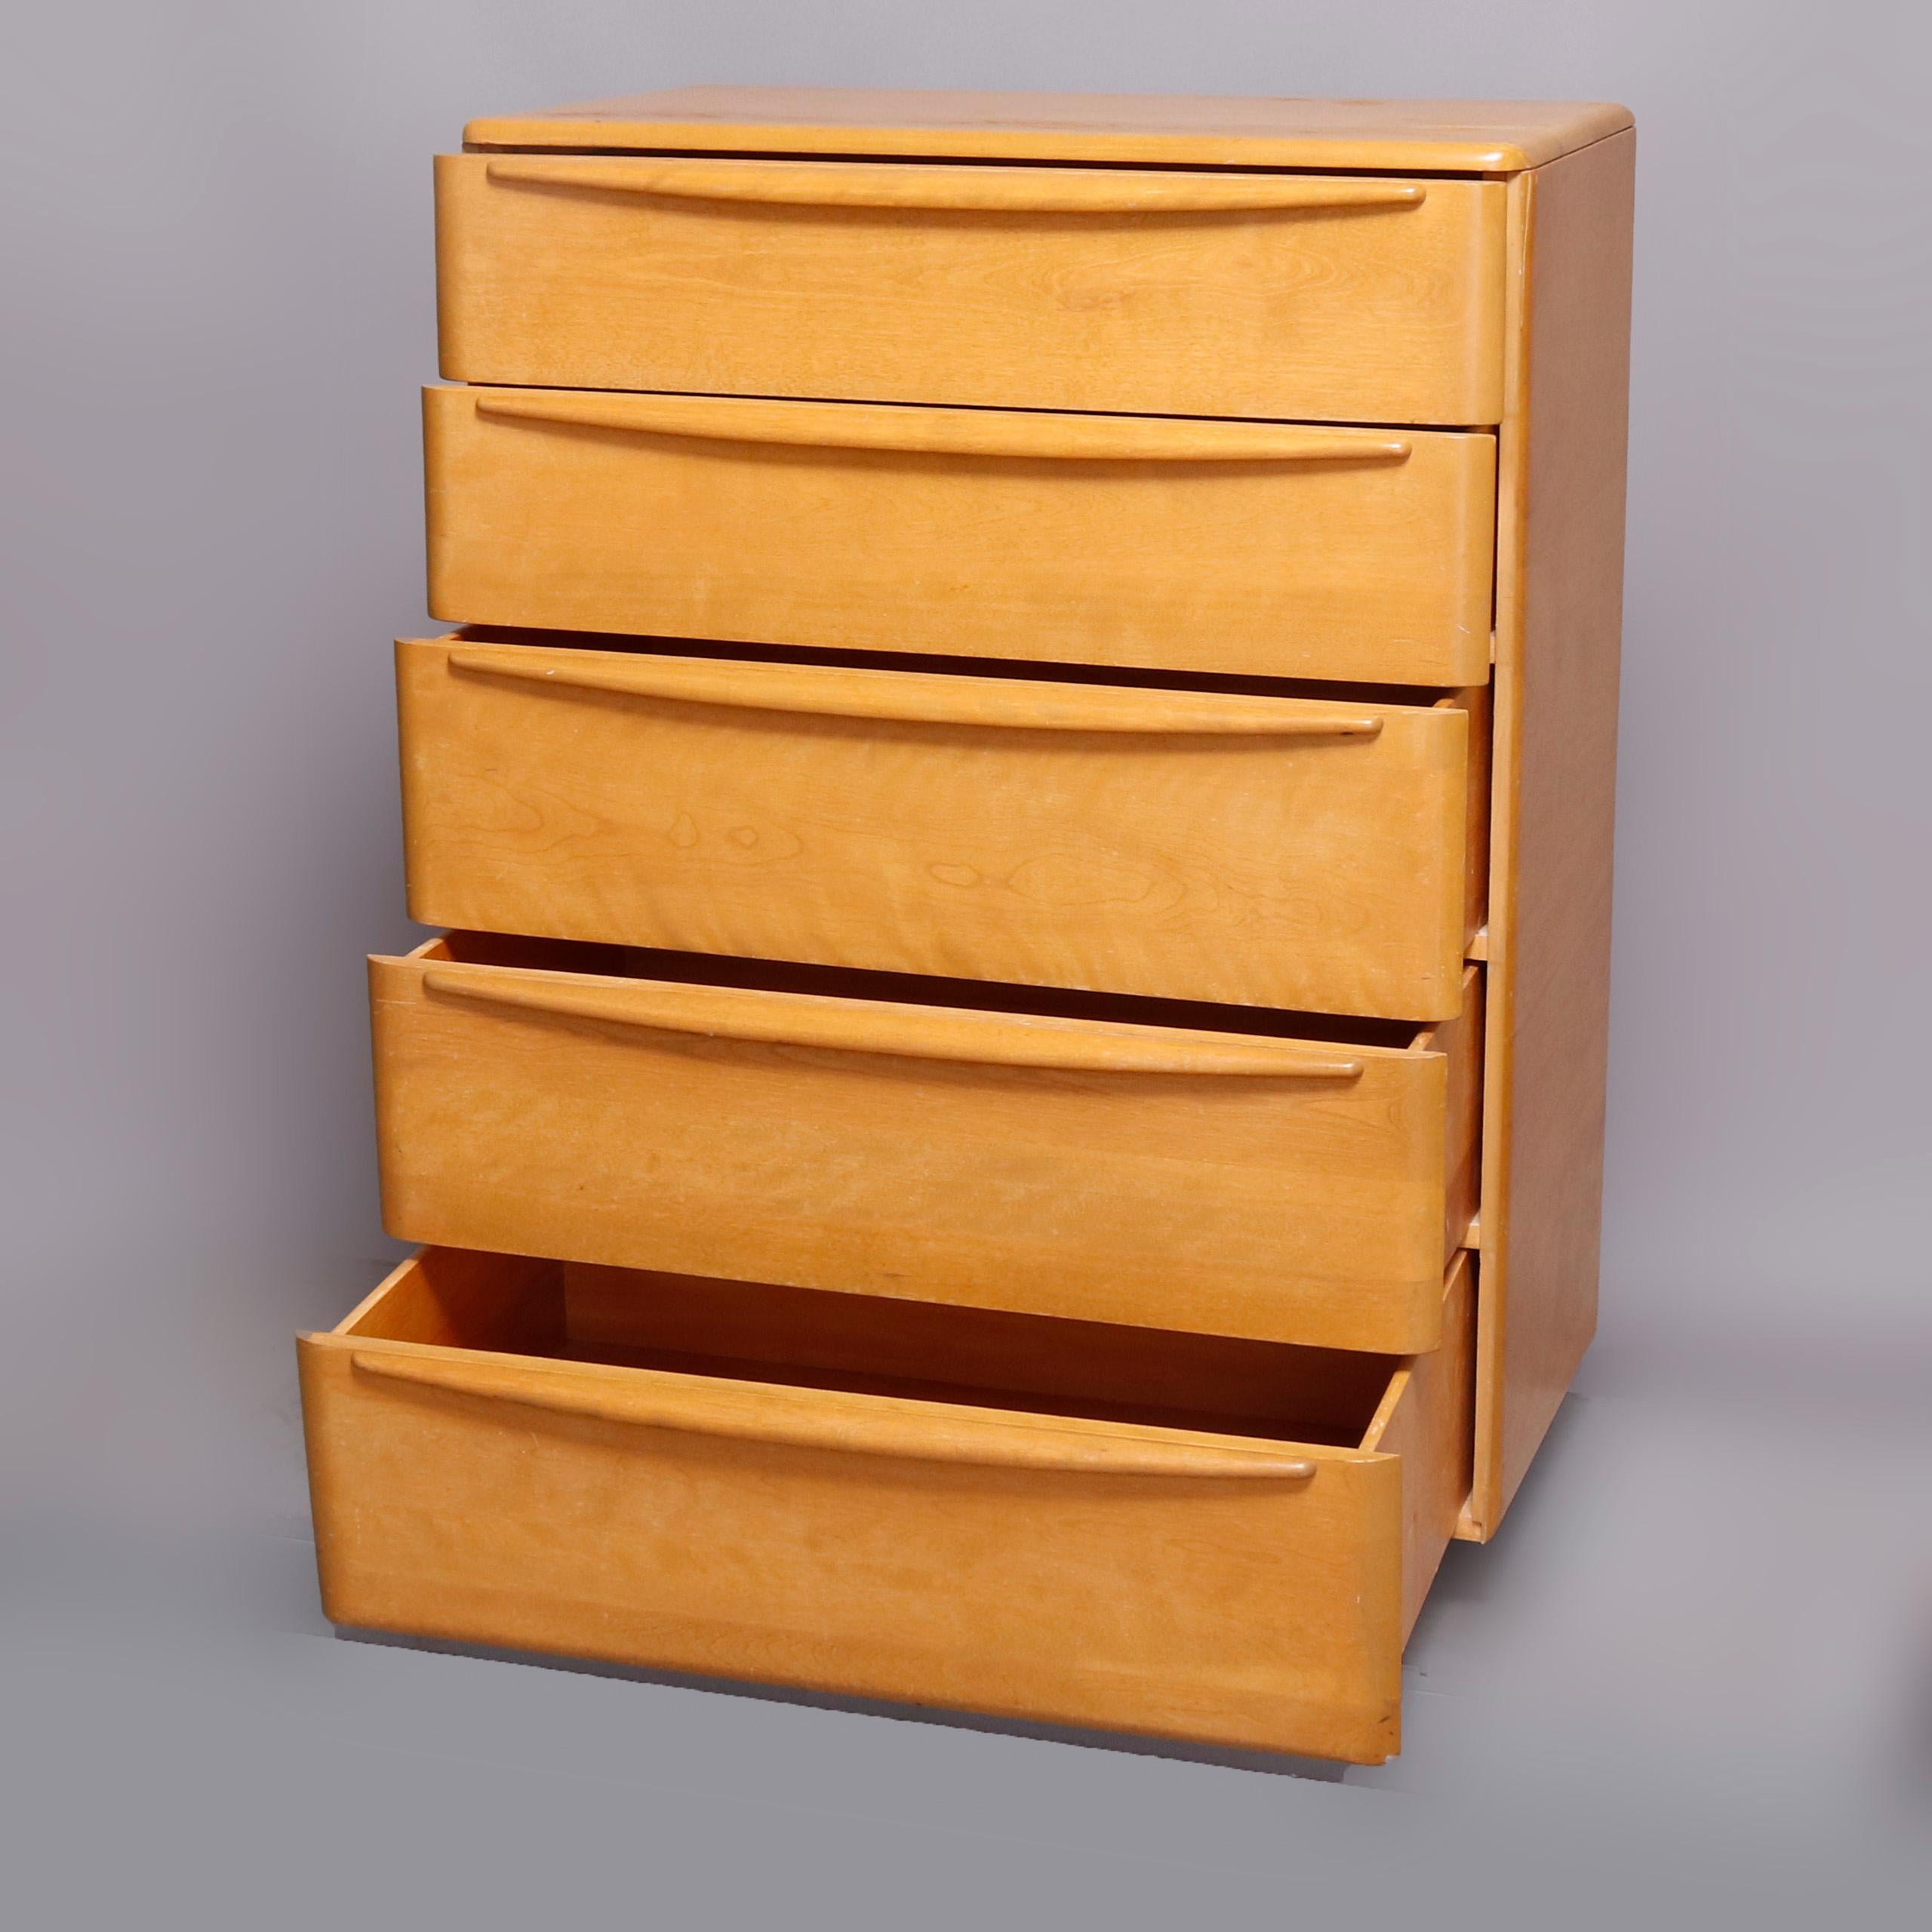 A Mid-Century Modern highboy dresser by Heywood Wakefield offers the birch construction in the Encore pattern in Wheat finish and having five long drawers, mid-20th century

***DELIVERY NOTICE – Due to COVID-19 we are employing NO-CONTACT PRACTICES